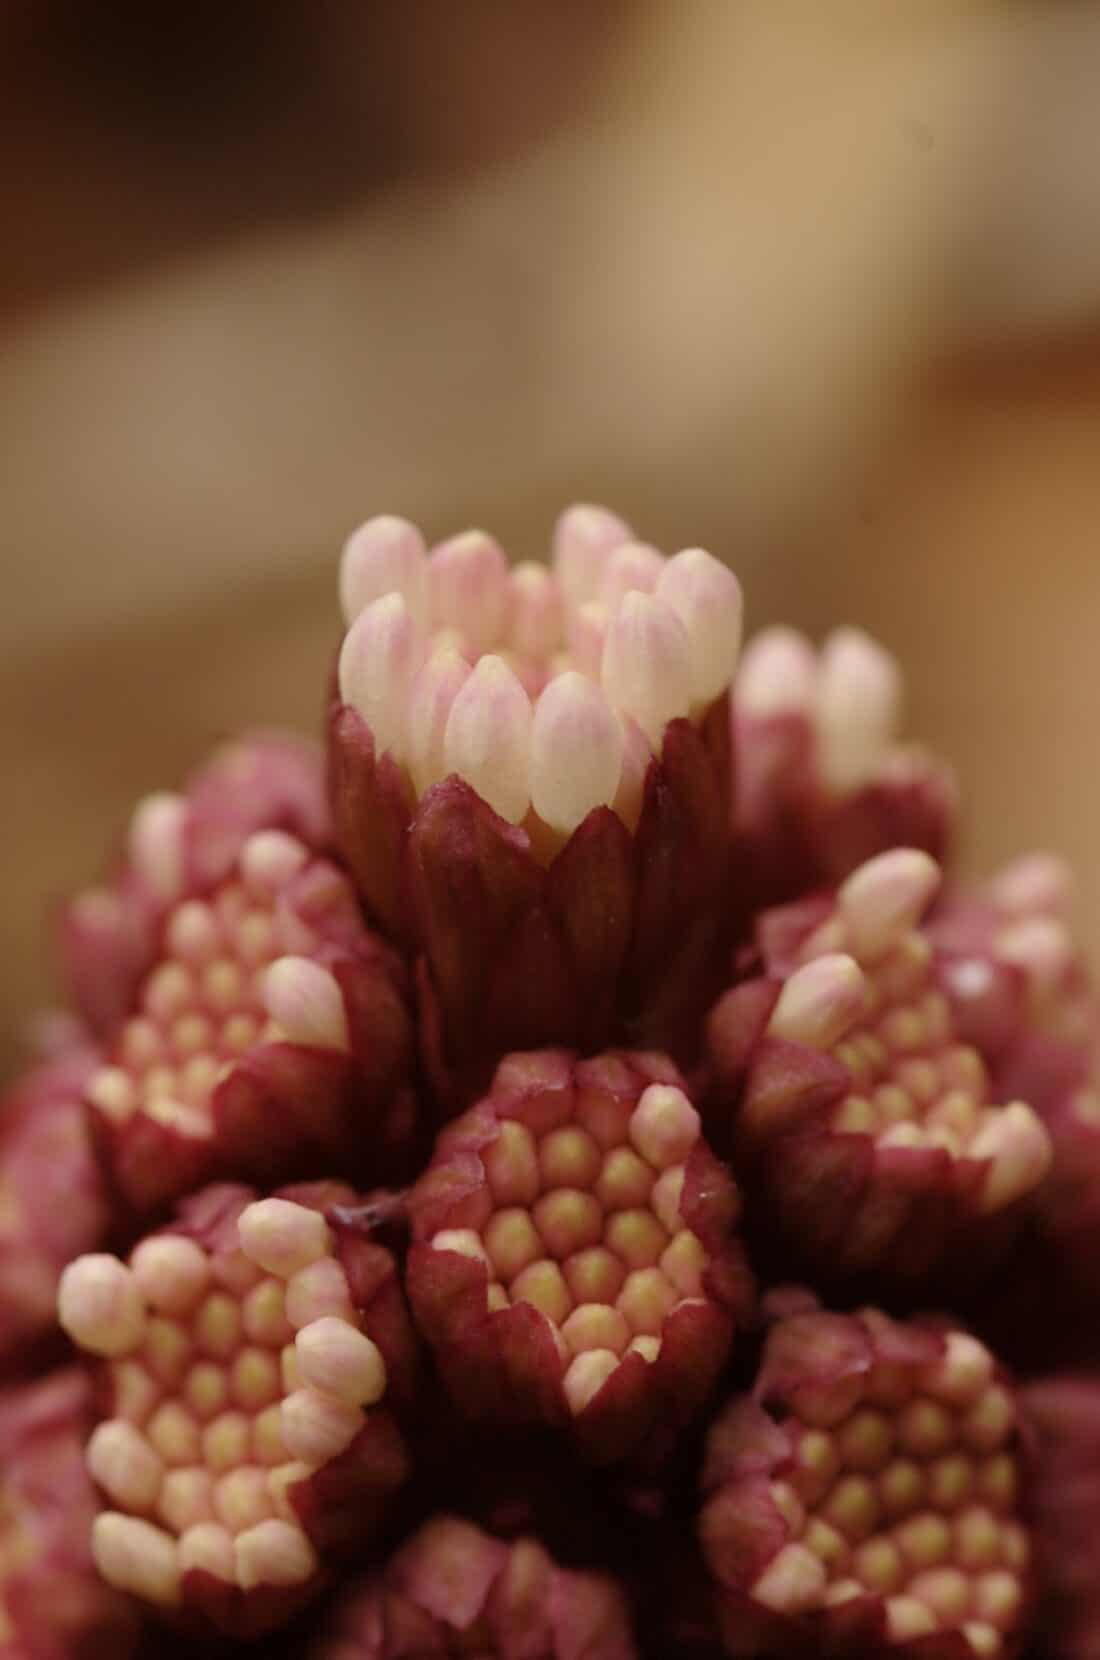 Close-up of a petasites japonicus flower head showing multiple clusters of deep red buds with tiny, pale pink tips. The texture and pattern of the buds are intricate, resembling small, tightly packed segments. The background is blurred, putting focus on the flower.